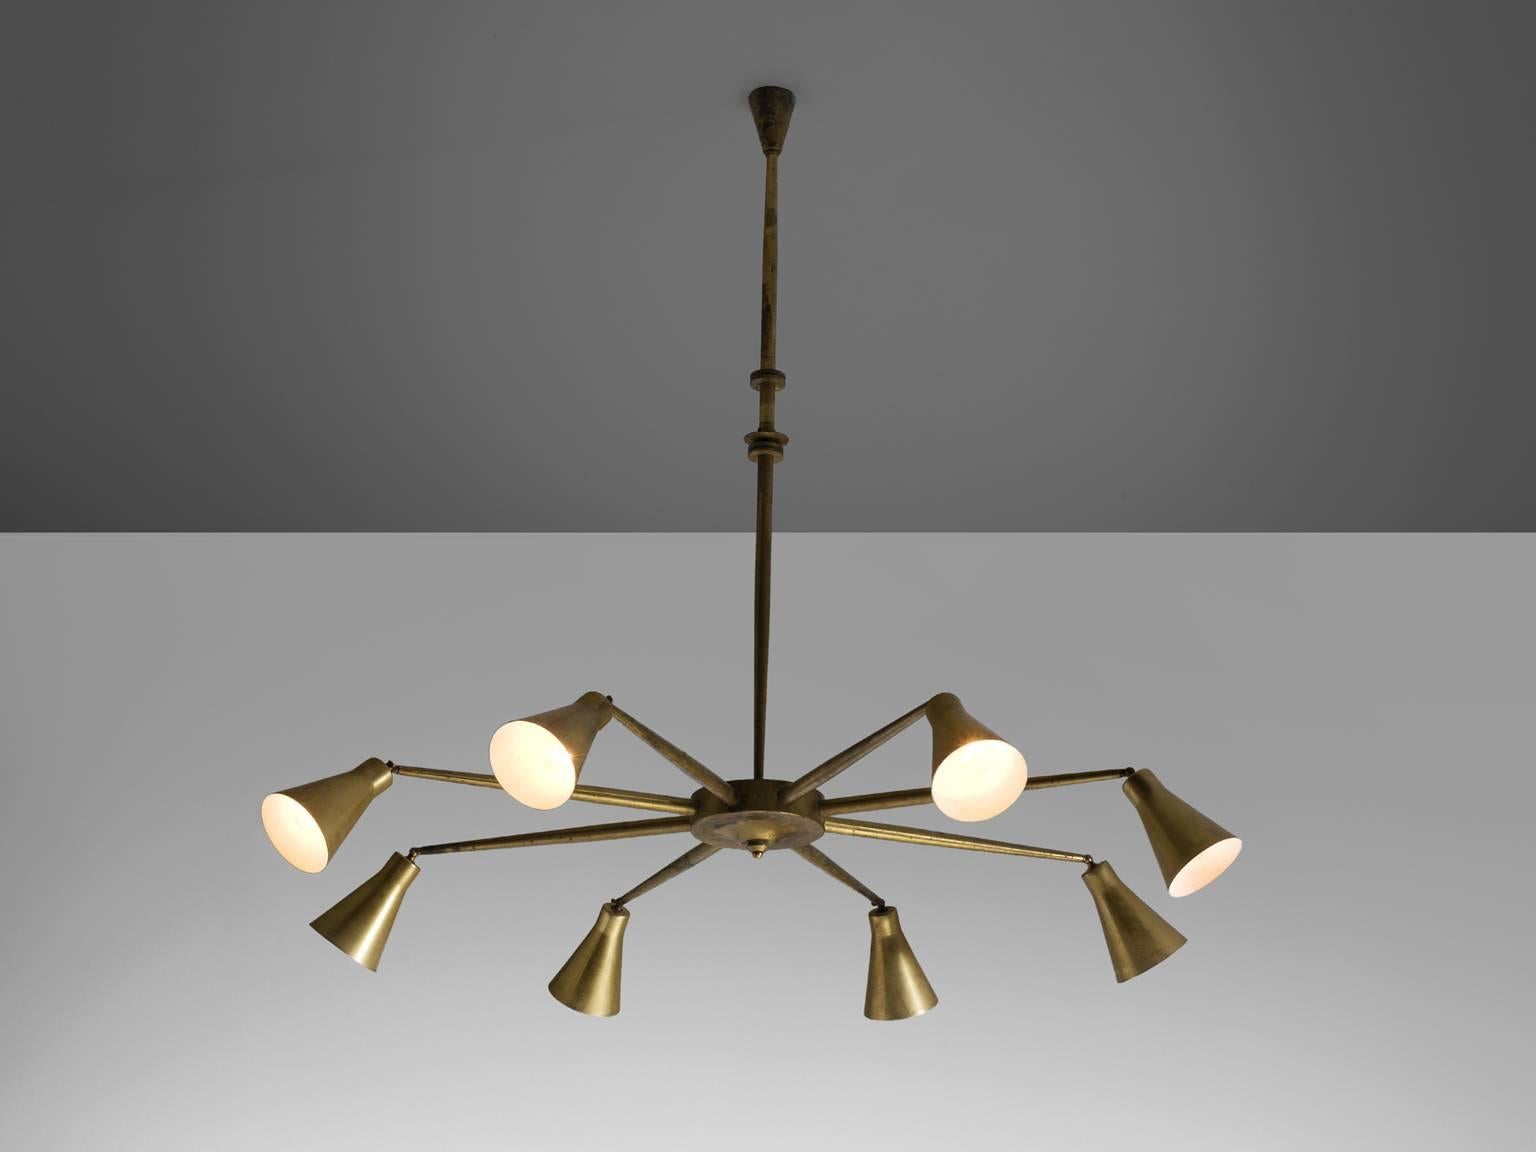 Pendant attributed to Giuseppe Ostuni, brass, Italy, circa 1958.

This brass, large eight-armed pendant is attributed to Giuseppe Ostuni for O-Luce. The lamp is both modern and Classic at the same time. A trait that Italian lights often achieve. The